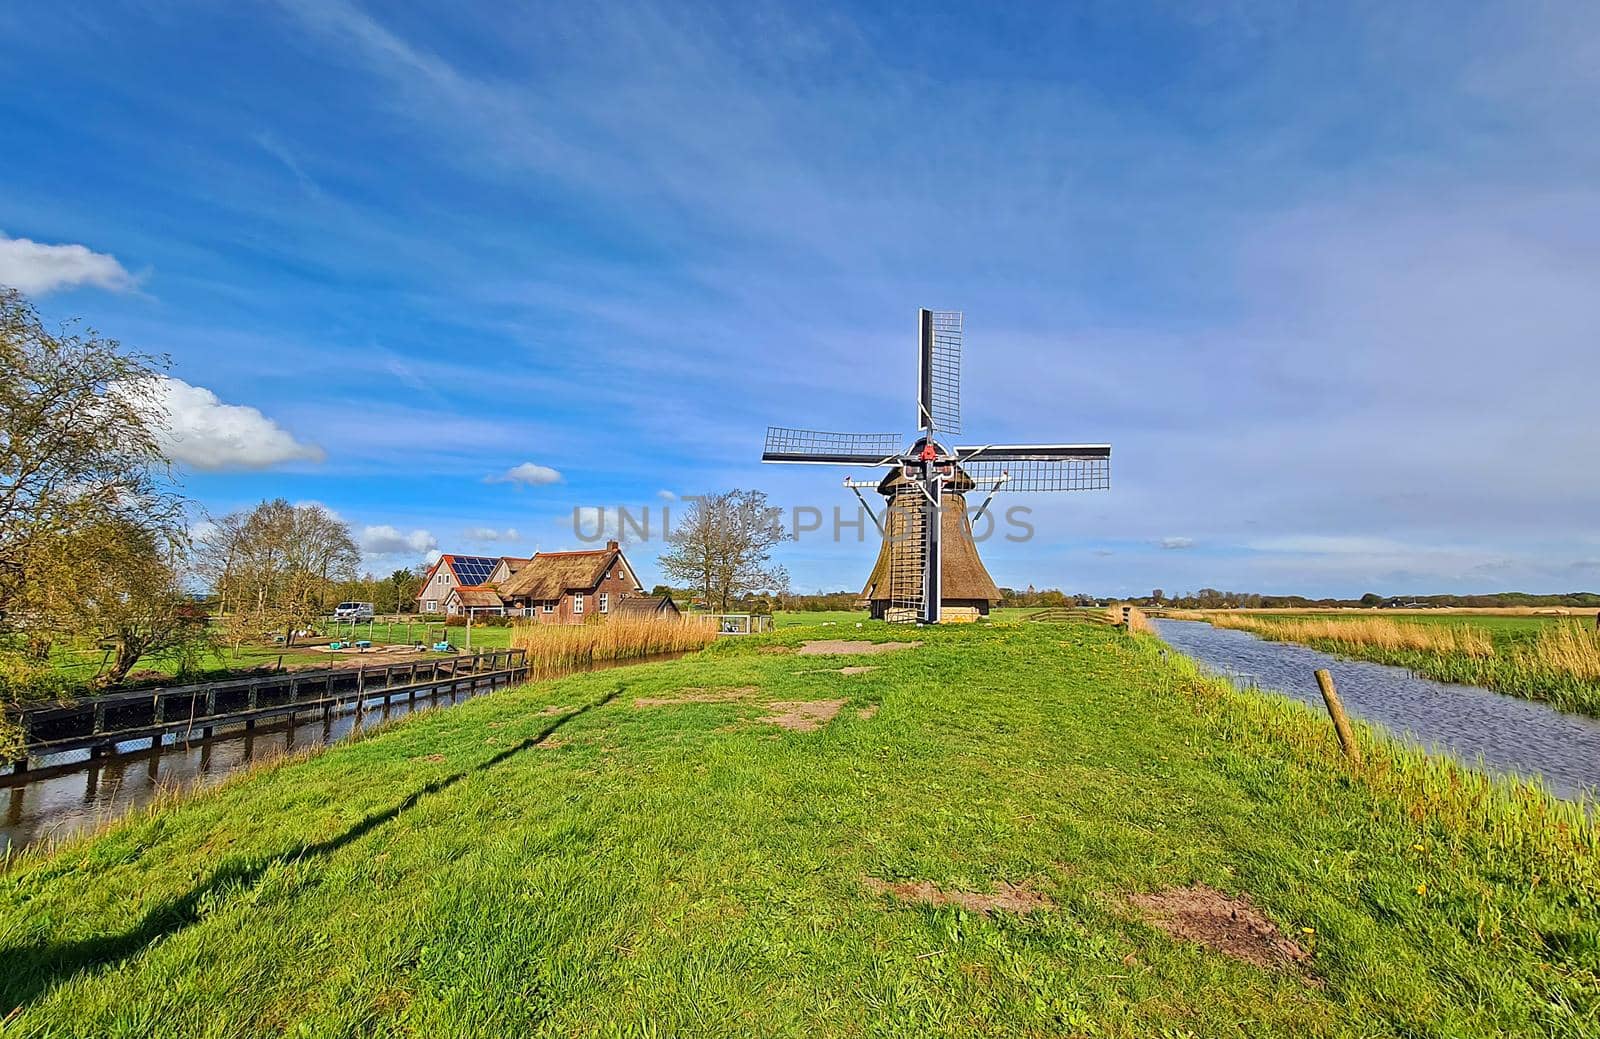 Oudkerker windmill in the countryside from the Netherlands by devy